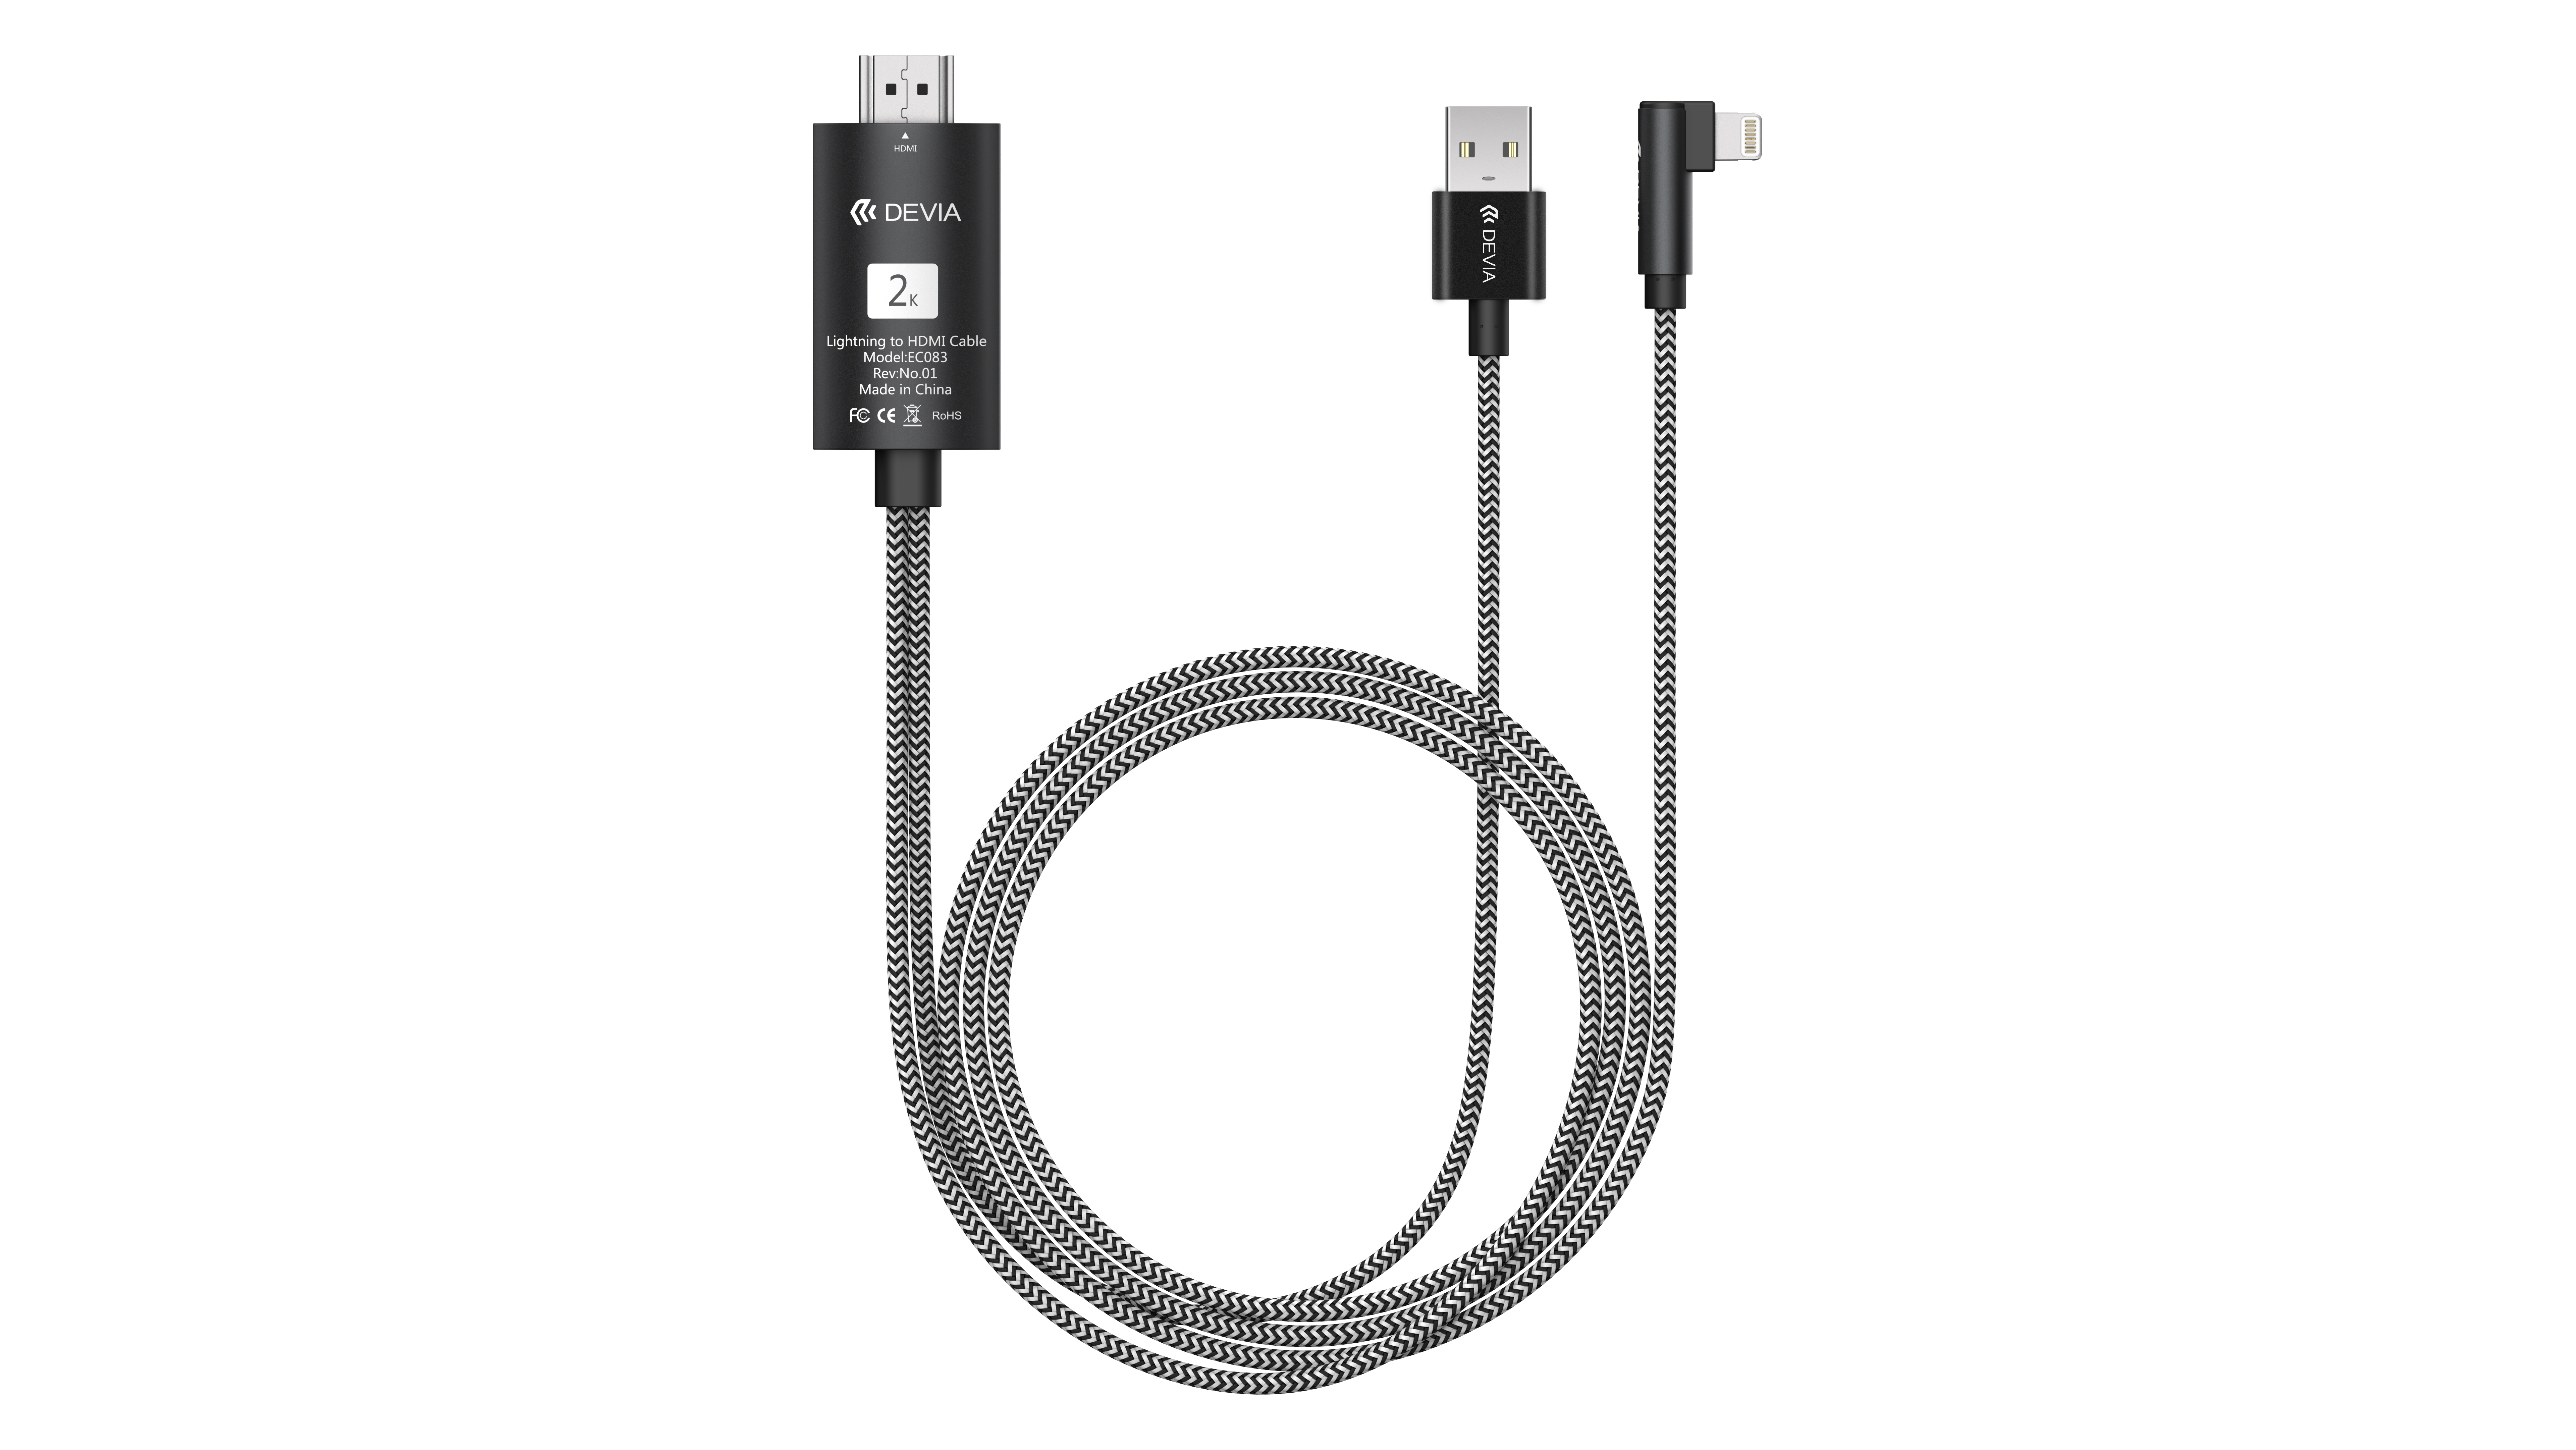 HDMI Cable - HDMI to Lightning Cable